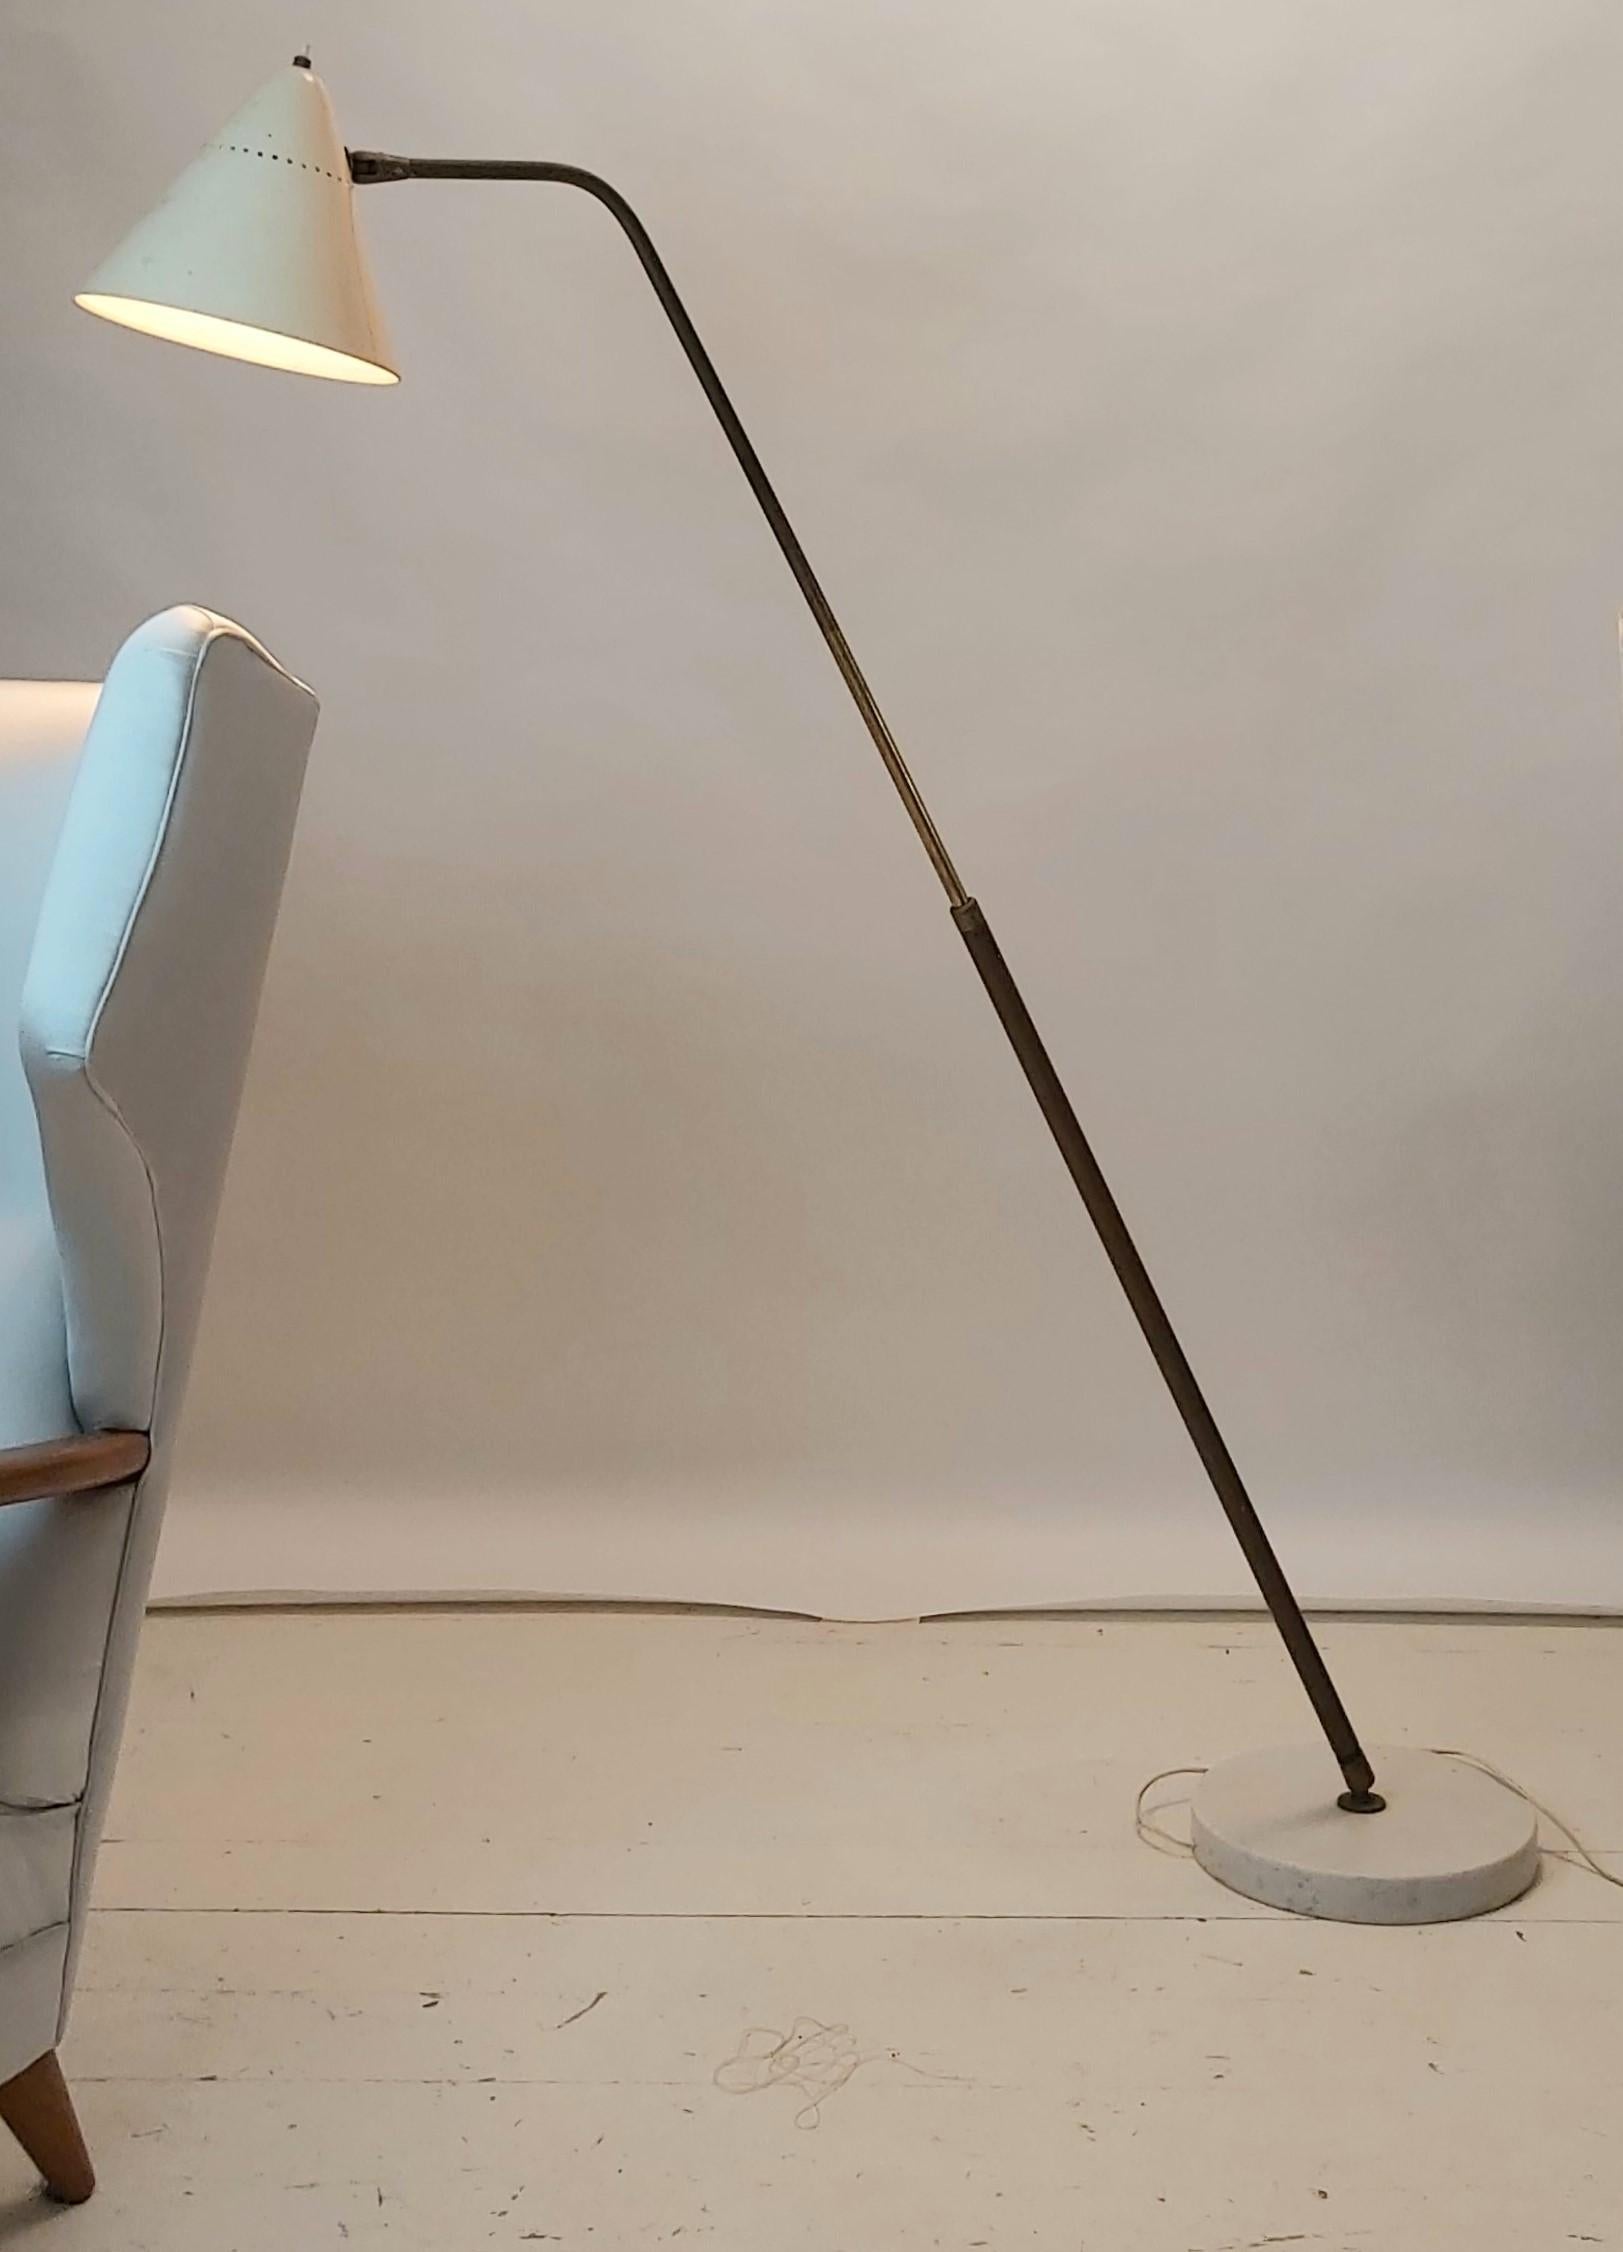 Rare floor lamp designed by one of the most important Italian lighting designer in the 1950s.
A thick marble basement support an extensible brass stem that can rotate 360 degrees making this lamp very versatile and playful.
The white lacquered